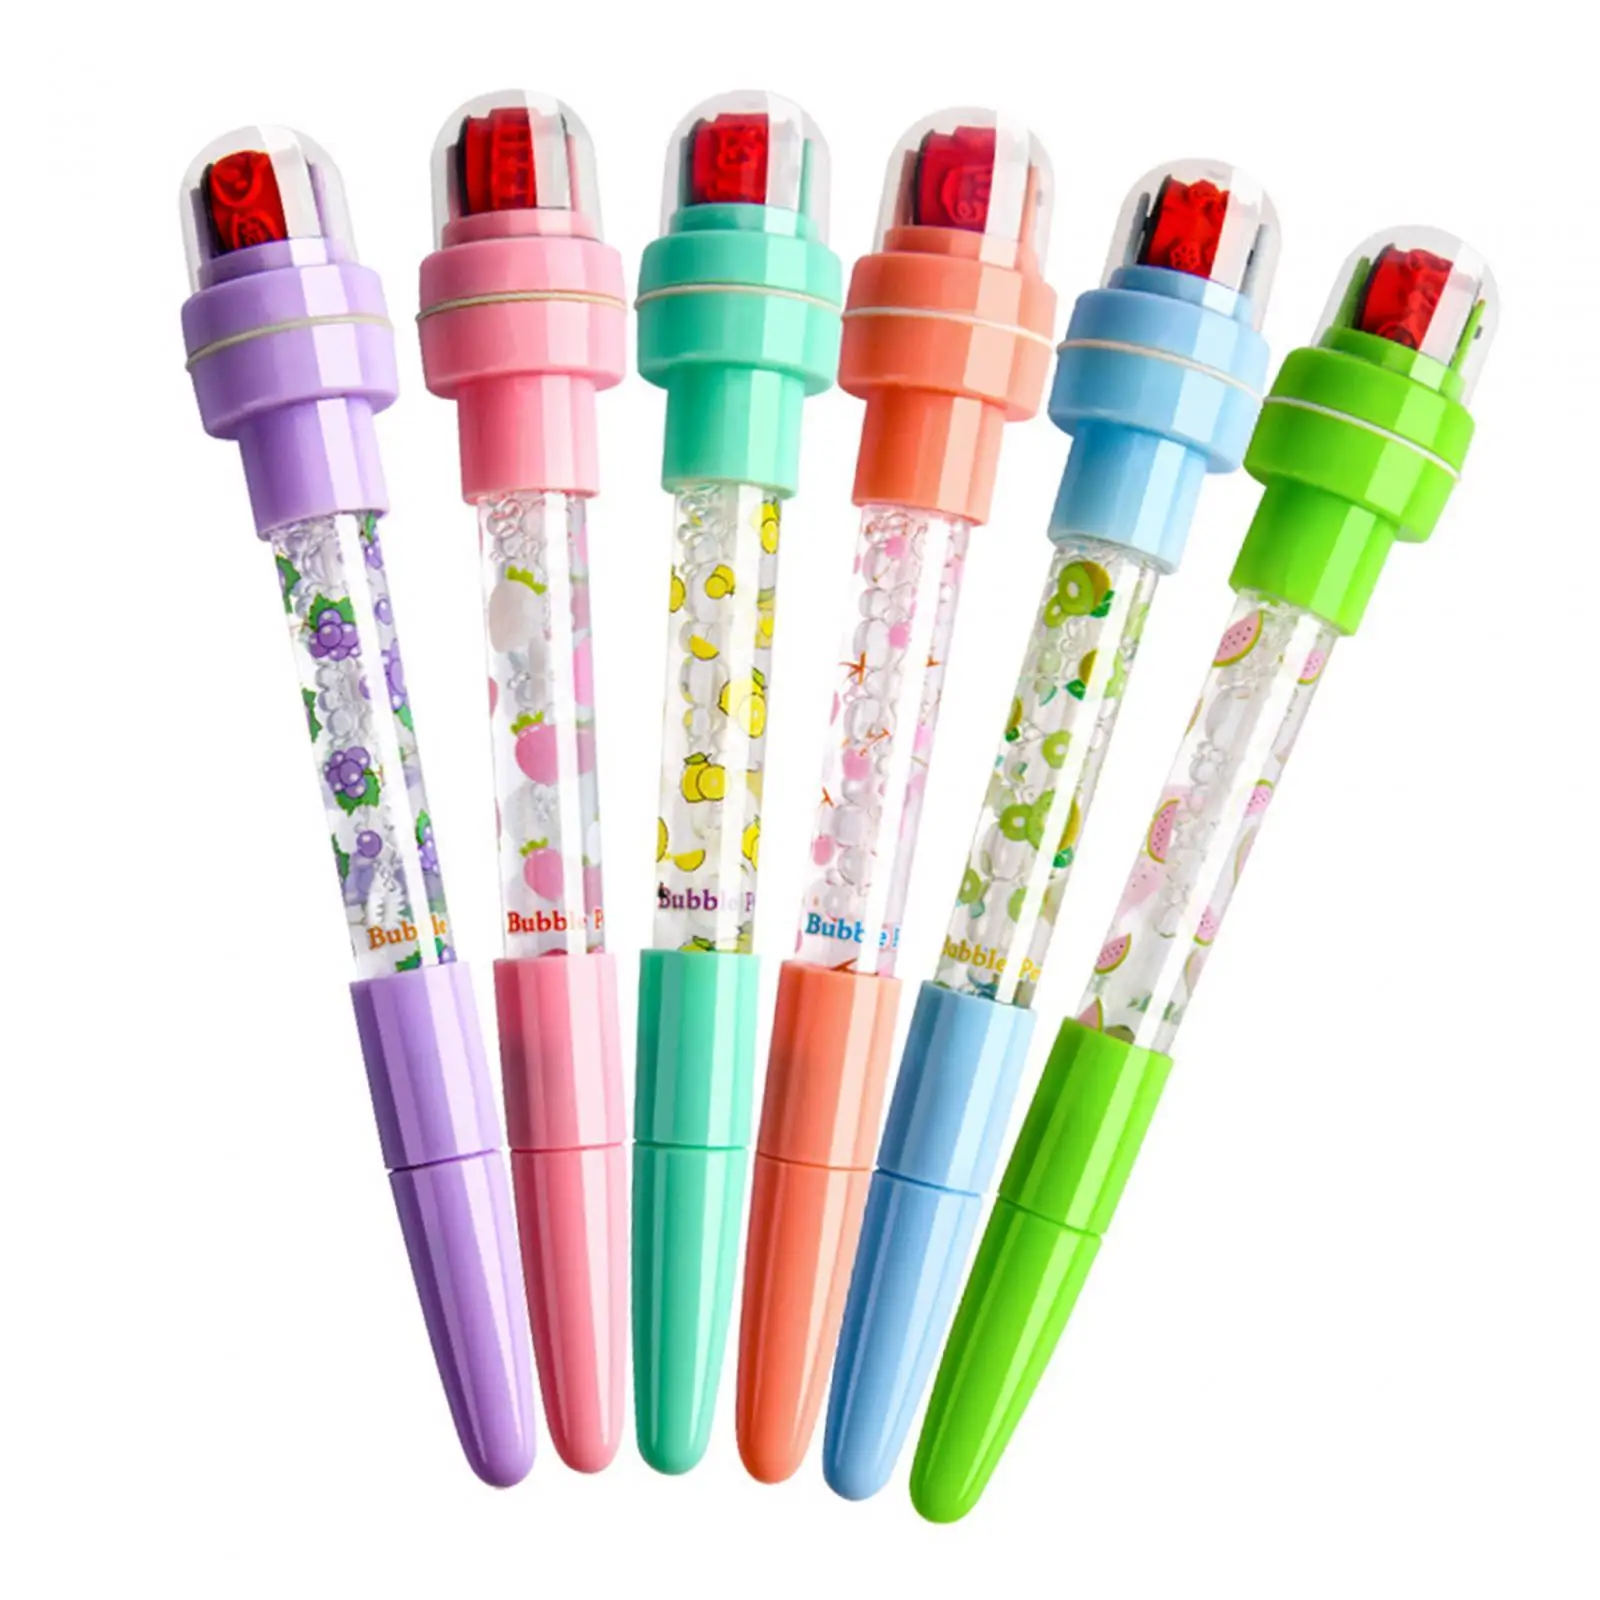 6x Ballpoint Pen 0.7mm Durable Supplies Multifunctional DIY Portable Stamp Toy Pens for Office Writing Classroom Draw Exam Spare